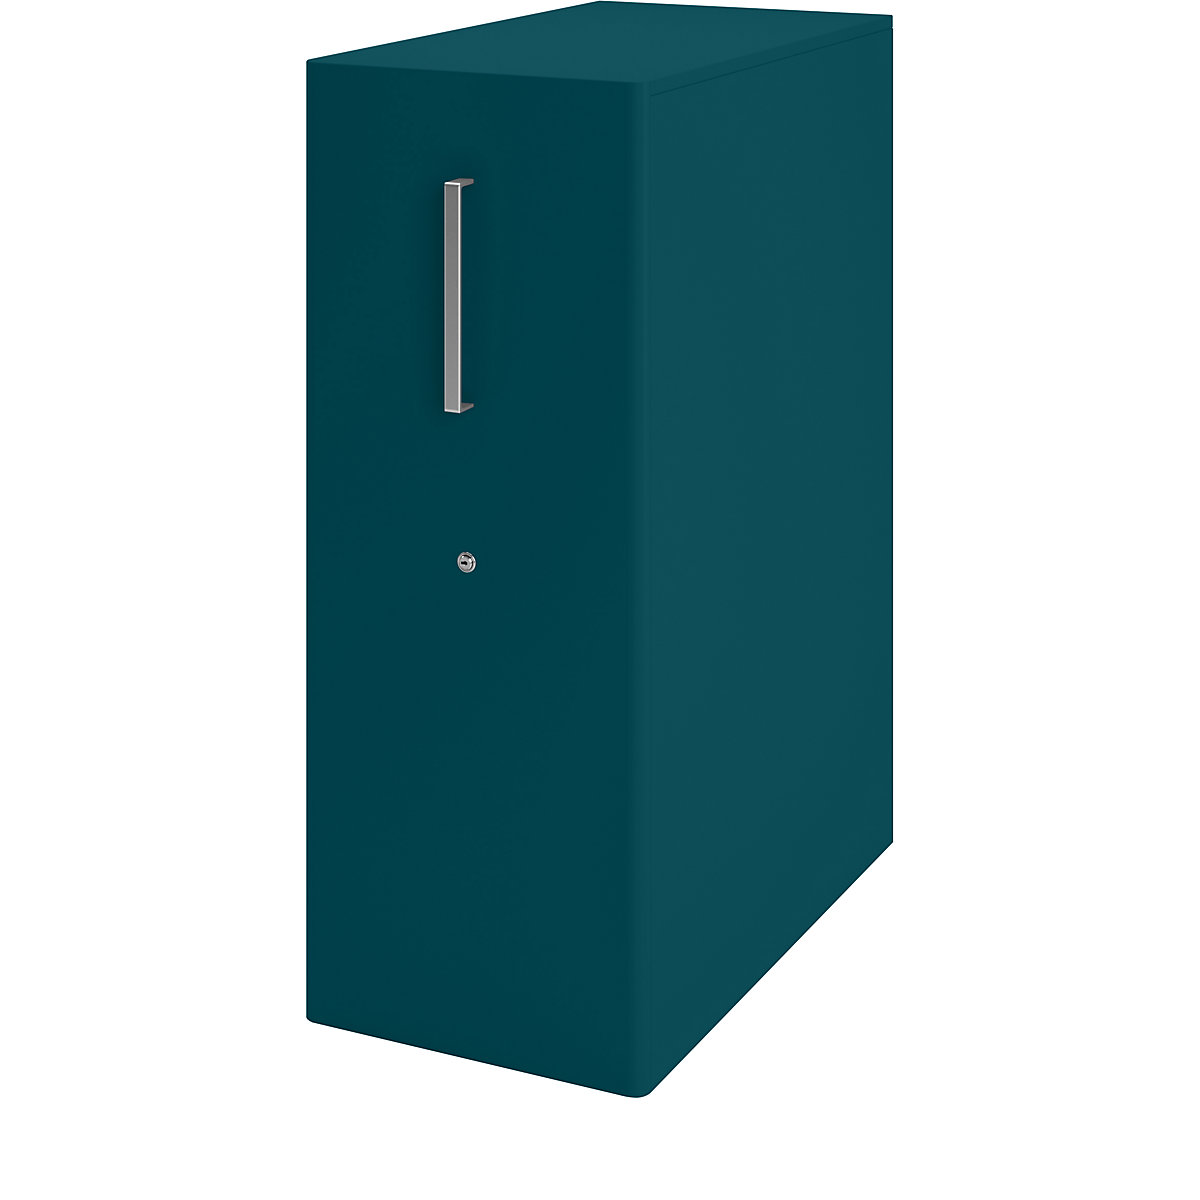 Tower™ 4 add-on furniture, with worktop, 1 pin board – BISLEY, for the right side, 1 shelf, ocean blue-18